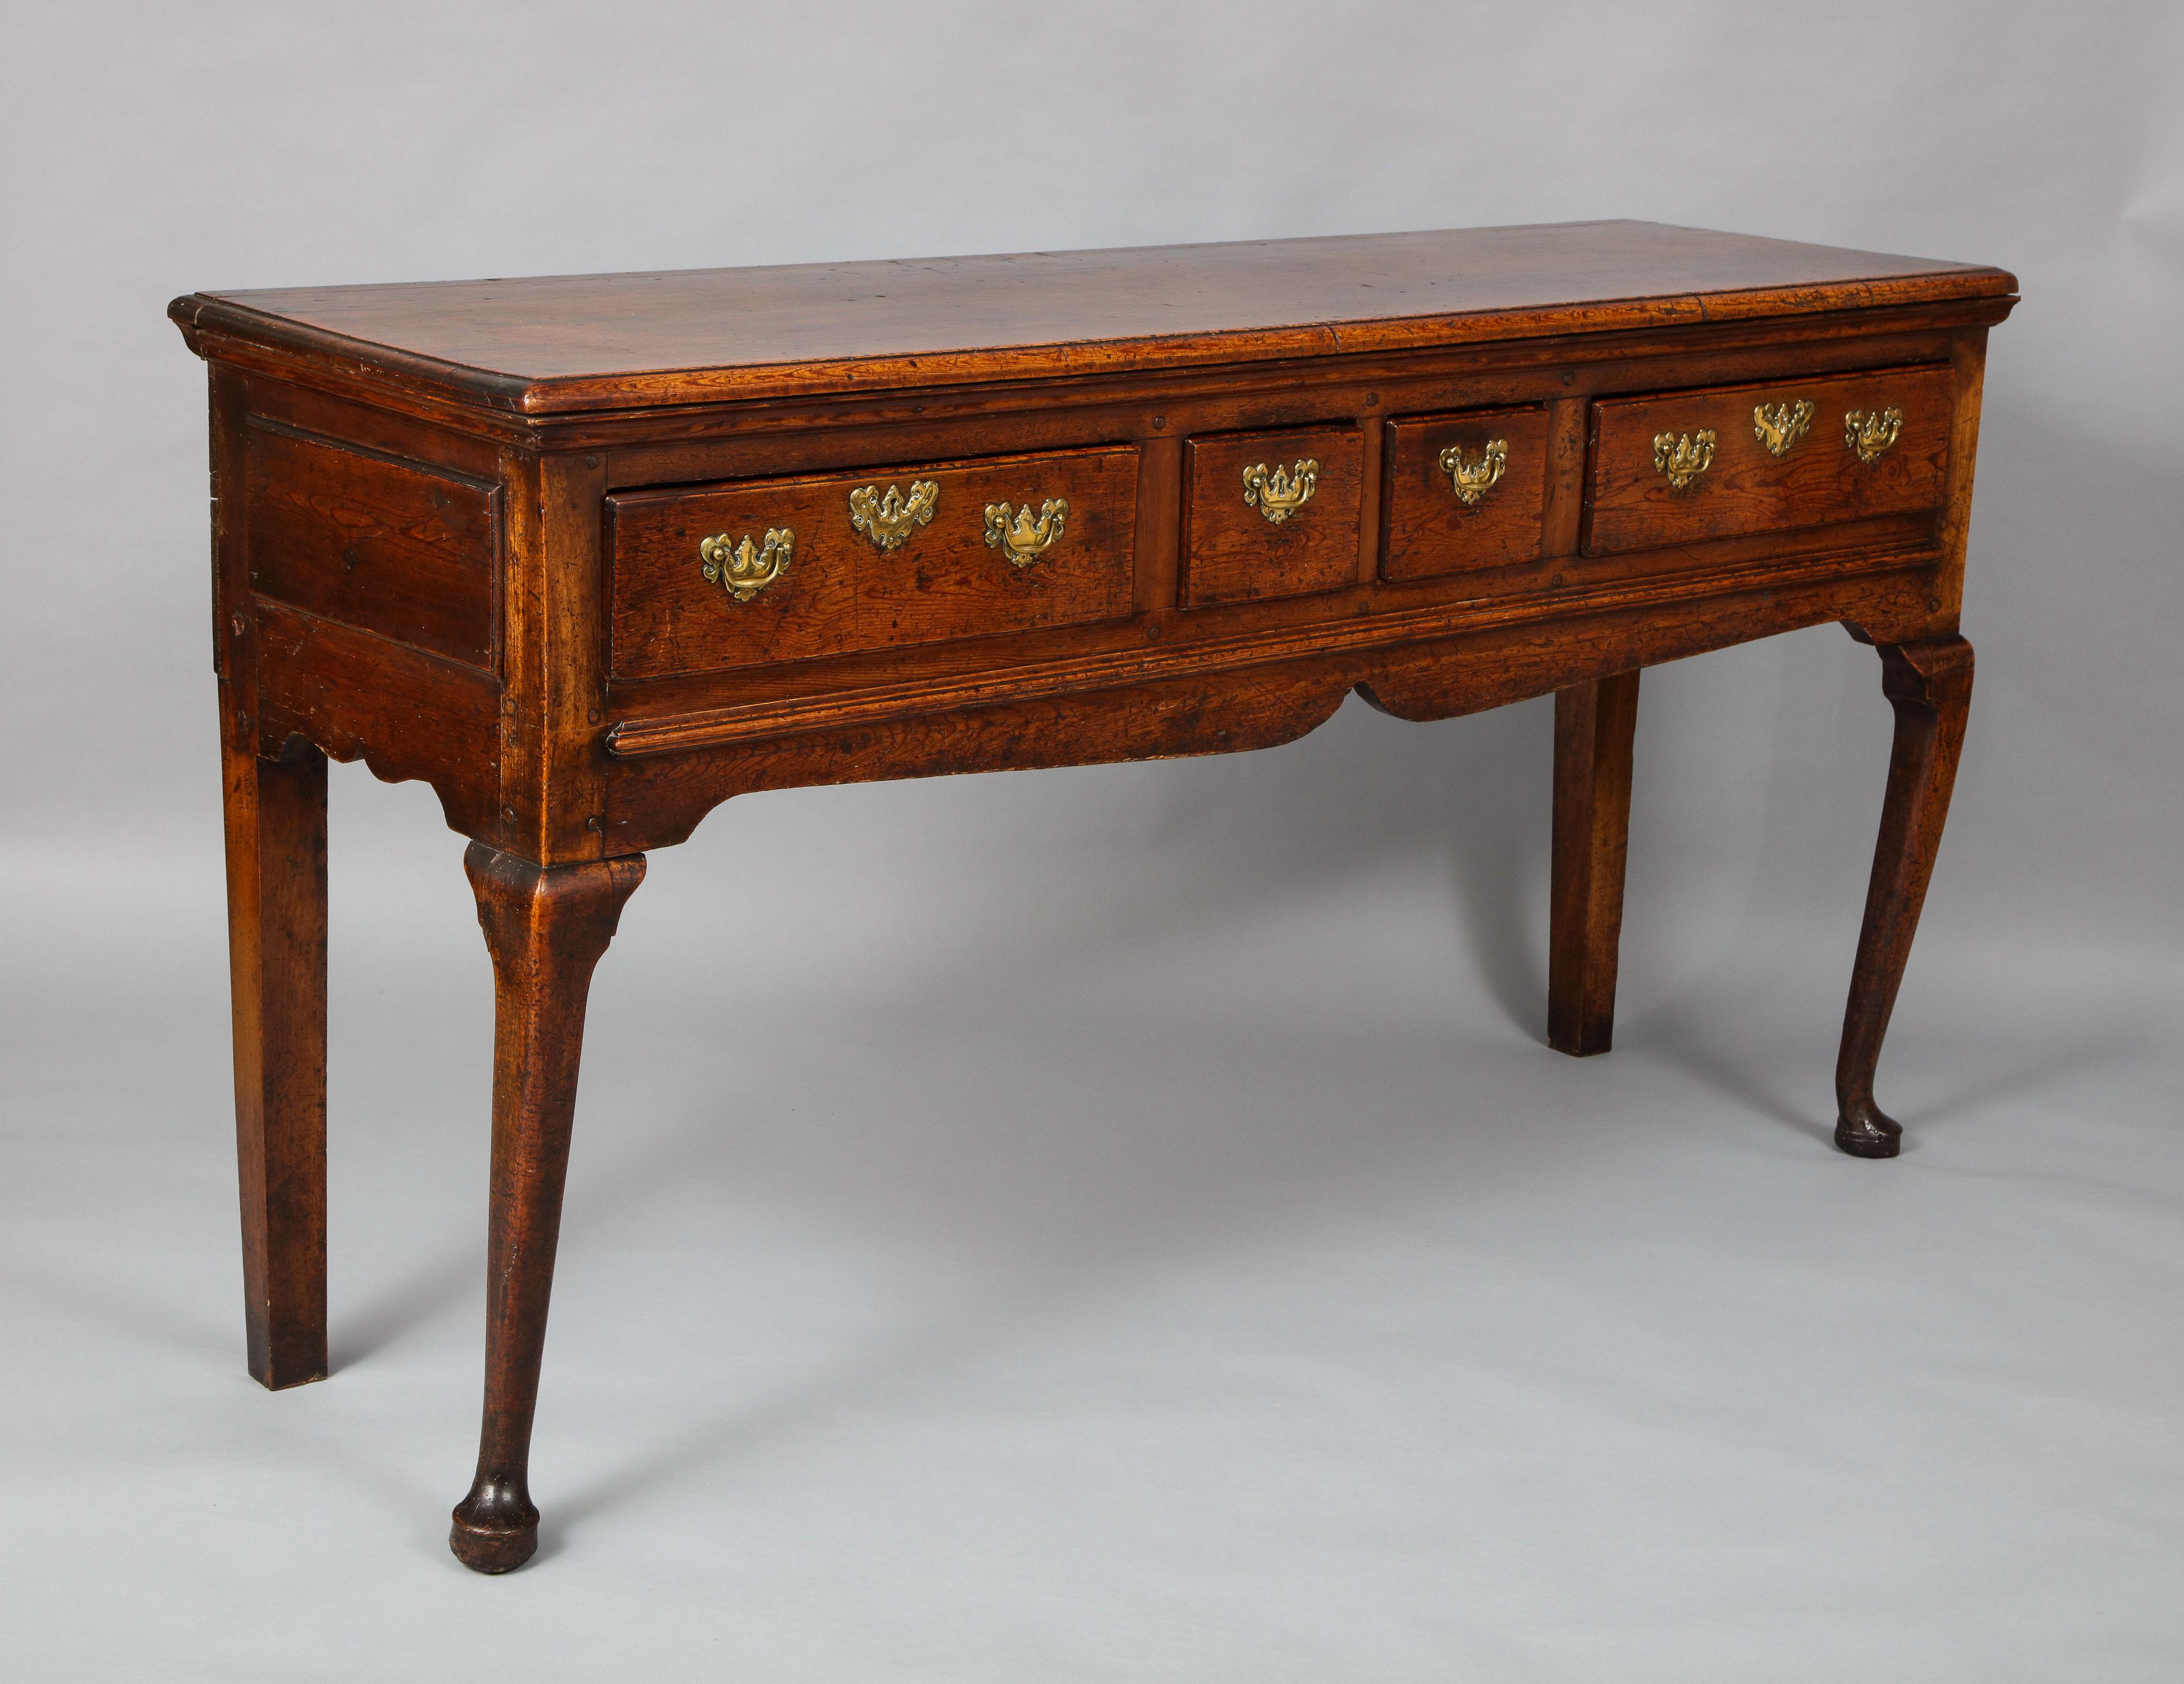 Very fine early 18th century English low dresser in richly patinated pine, the molded top over four drawers retaining original brass hardware, over cupid bow shaped apron and standing on cabriole front and square back legs, the whole with good rich,